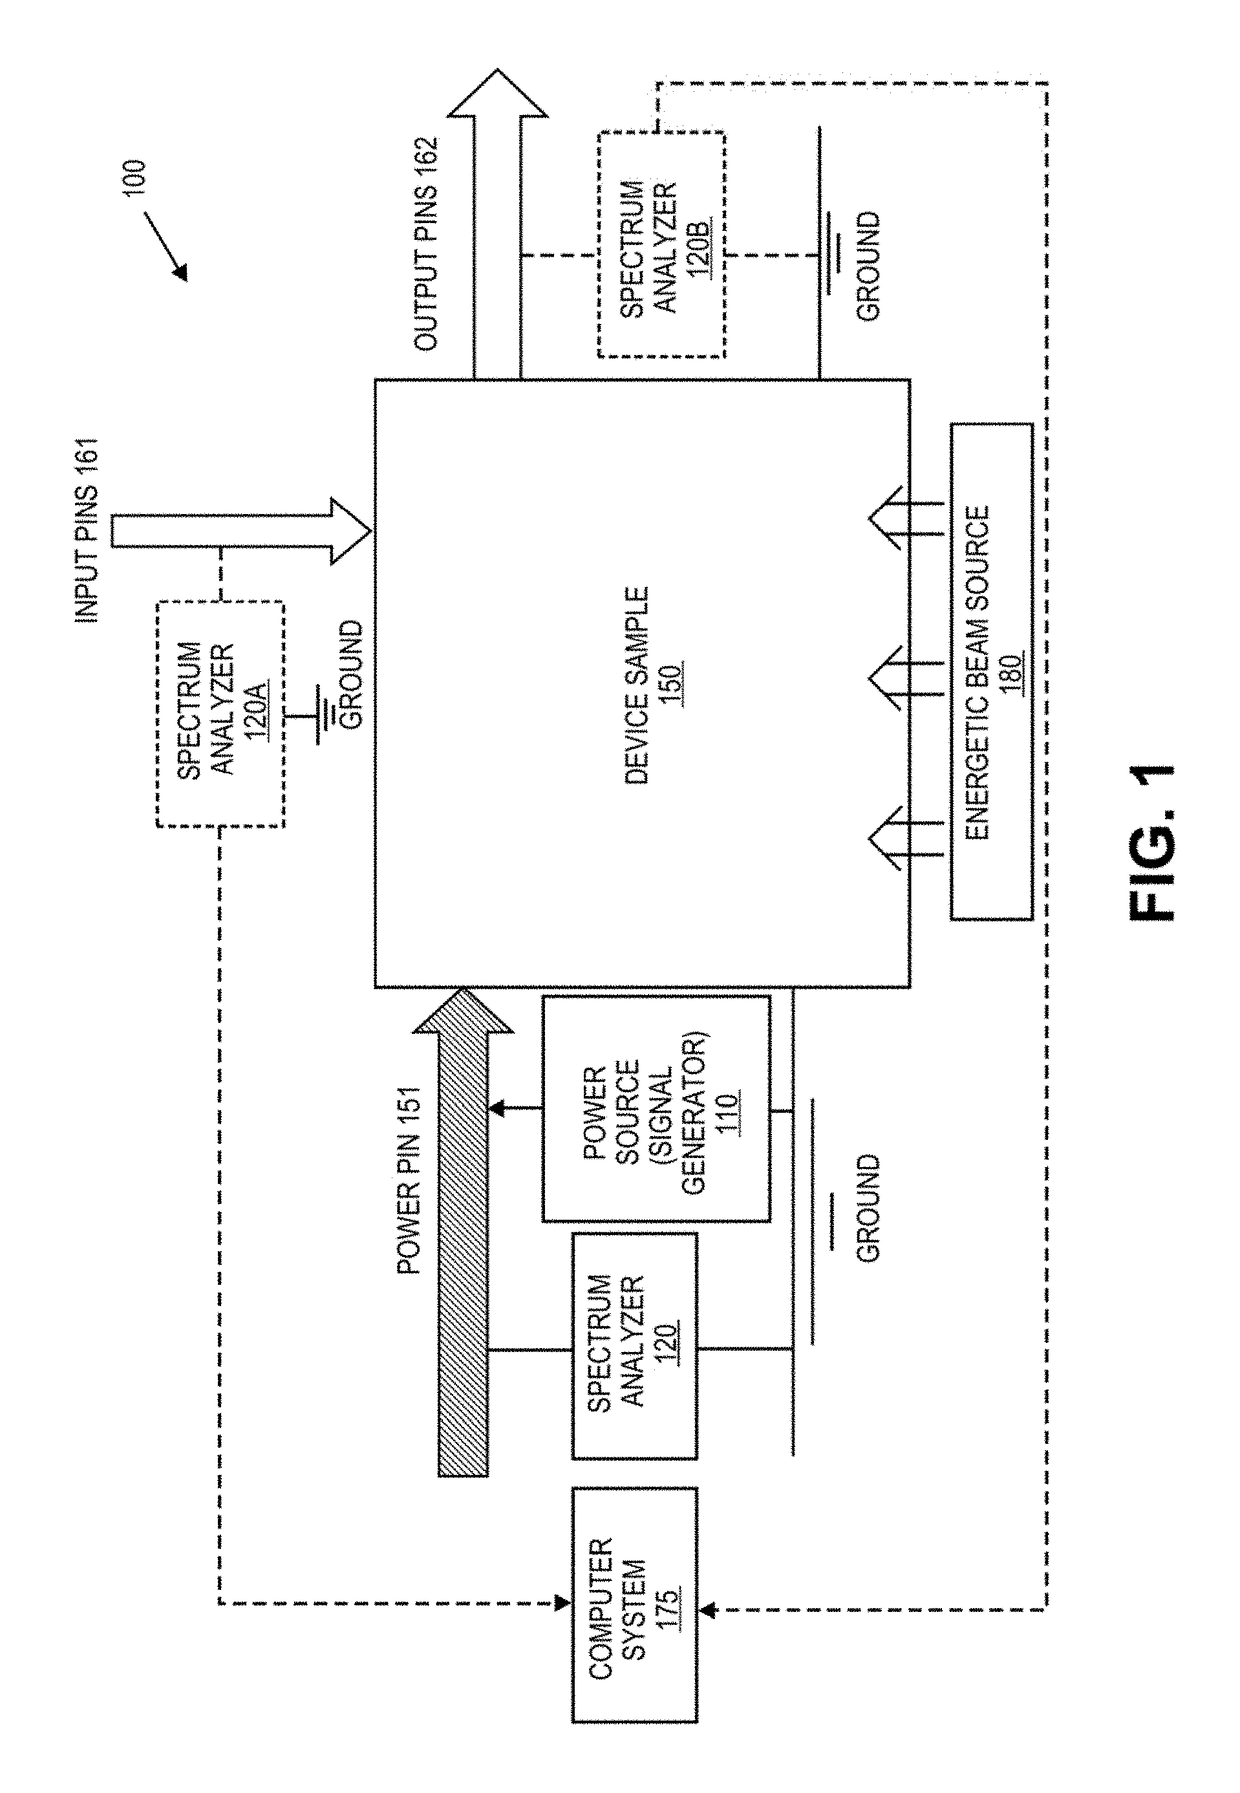 Defect screening method for electronic circuits and circuit components using power spectrum anaylysis